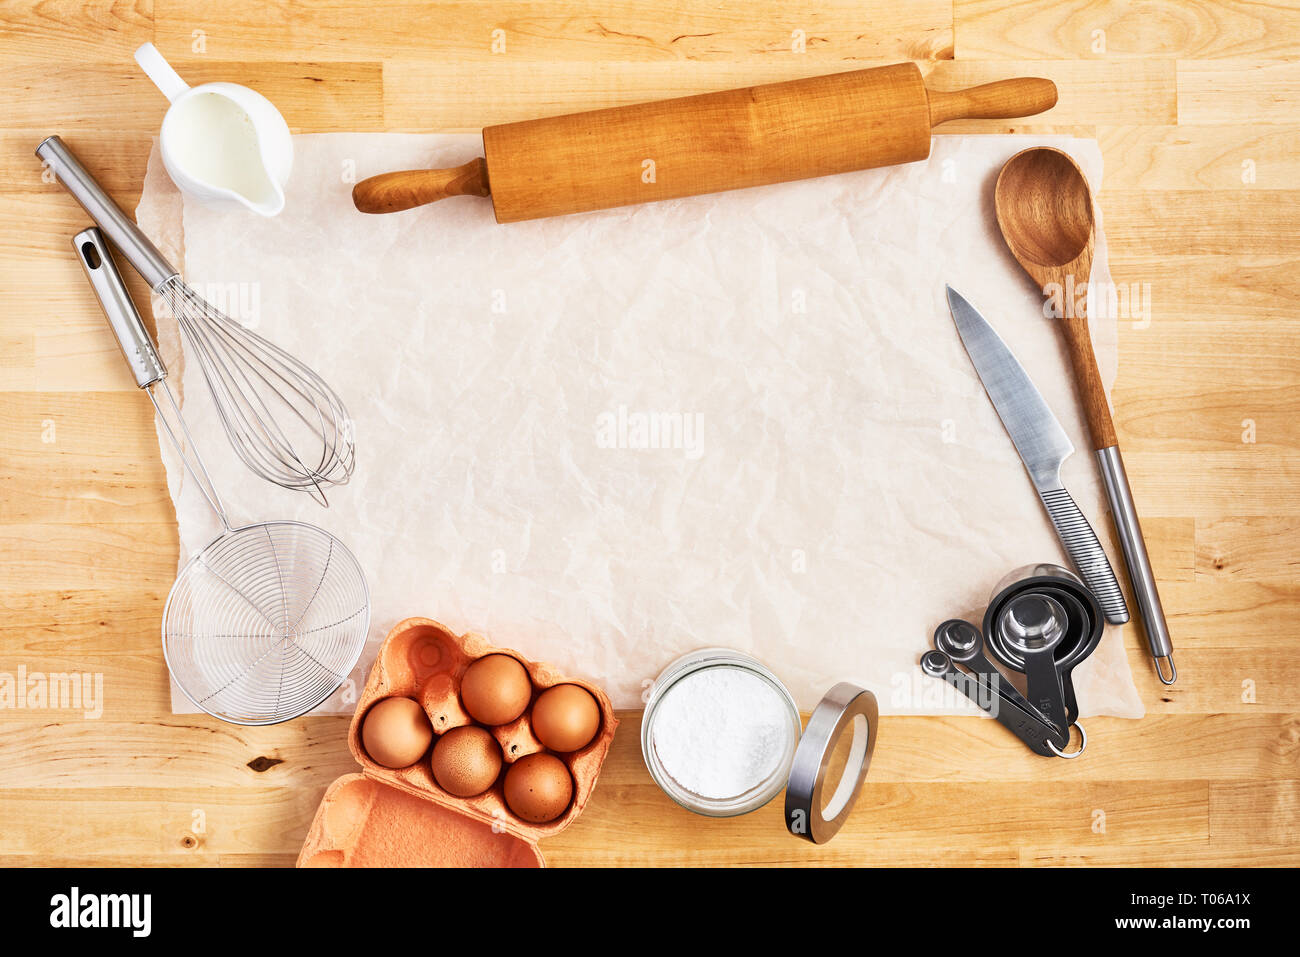 https://c8.alamy.com/comp/T06A1X/rolling-pin-food-ingredients-and-kitchen-utensils-on-crumpled-piece-of-white-parchment-or-baking-paper-on-wooden-table-baking-background-concept-to-T06A1X.jpg